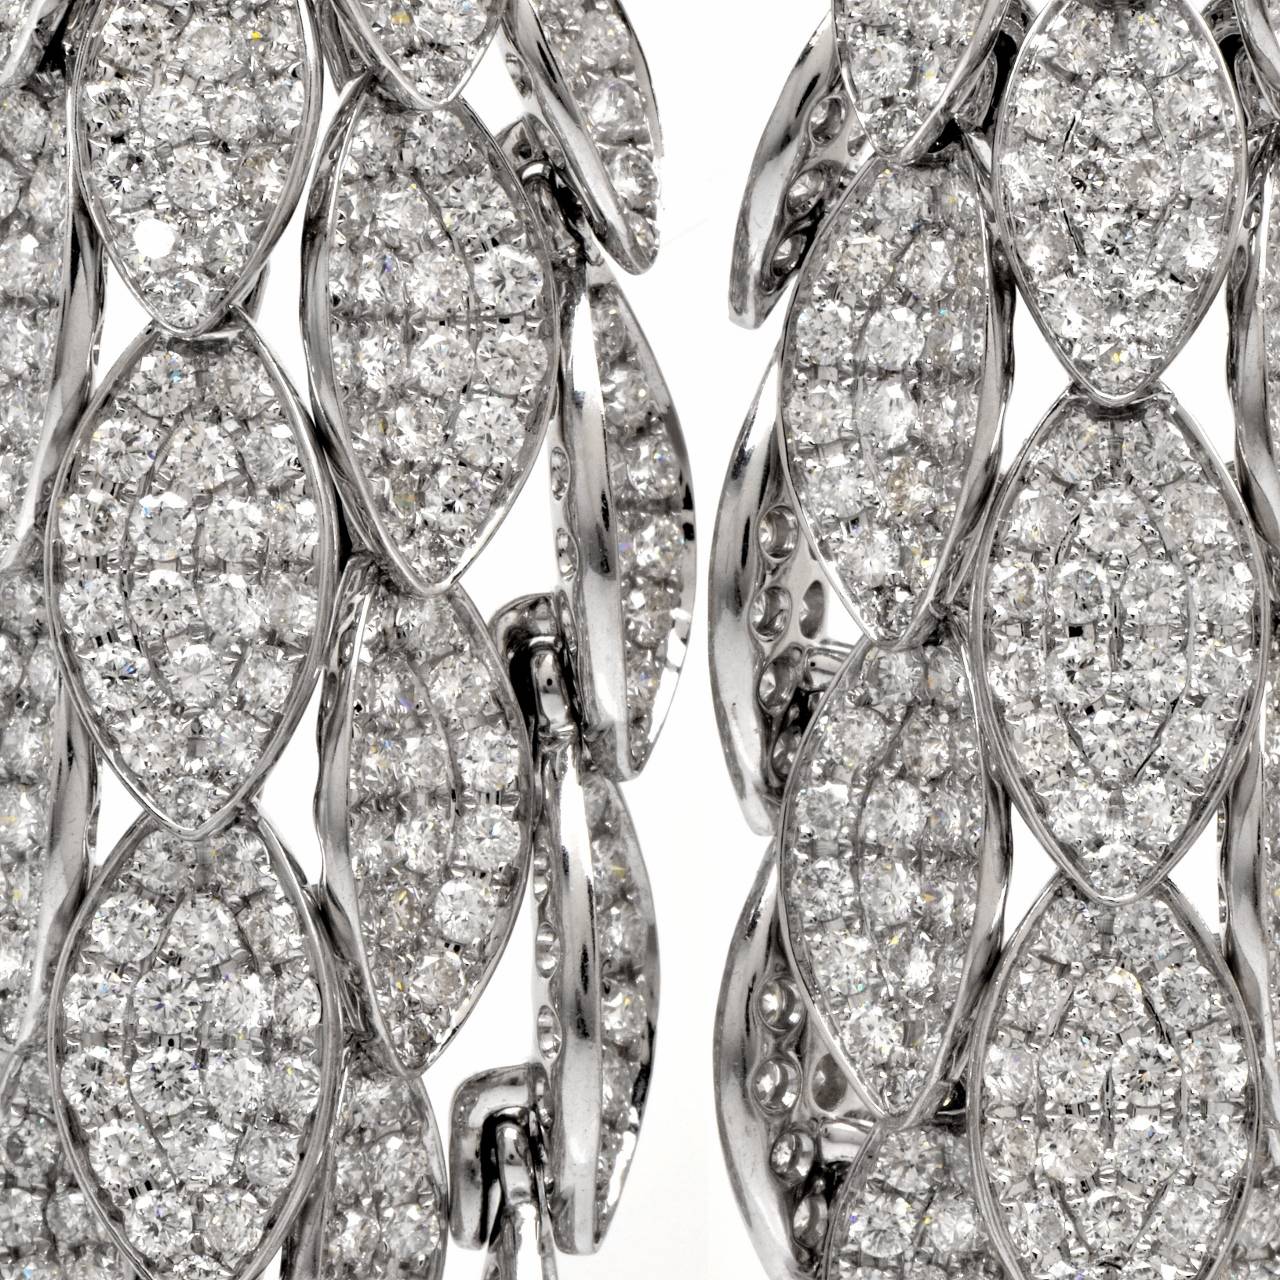 These gorgeous chandelier earrings of sophisticated  and refined  aesthetic are crafted in solid 18K white gold, weighing 43.00 grams and measuring 3